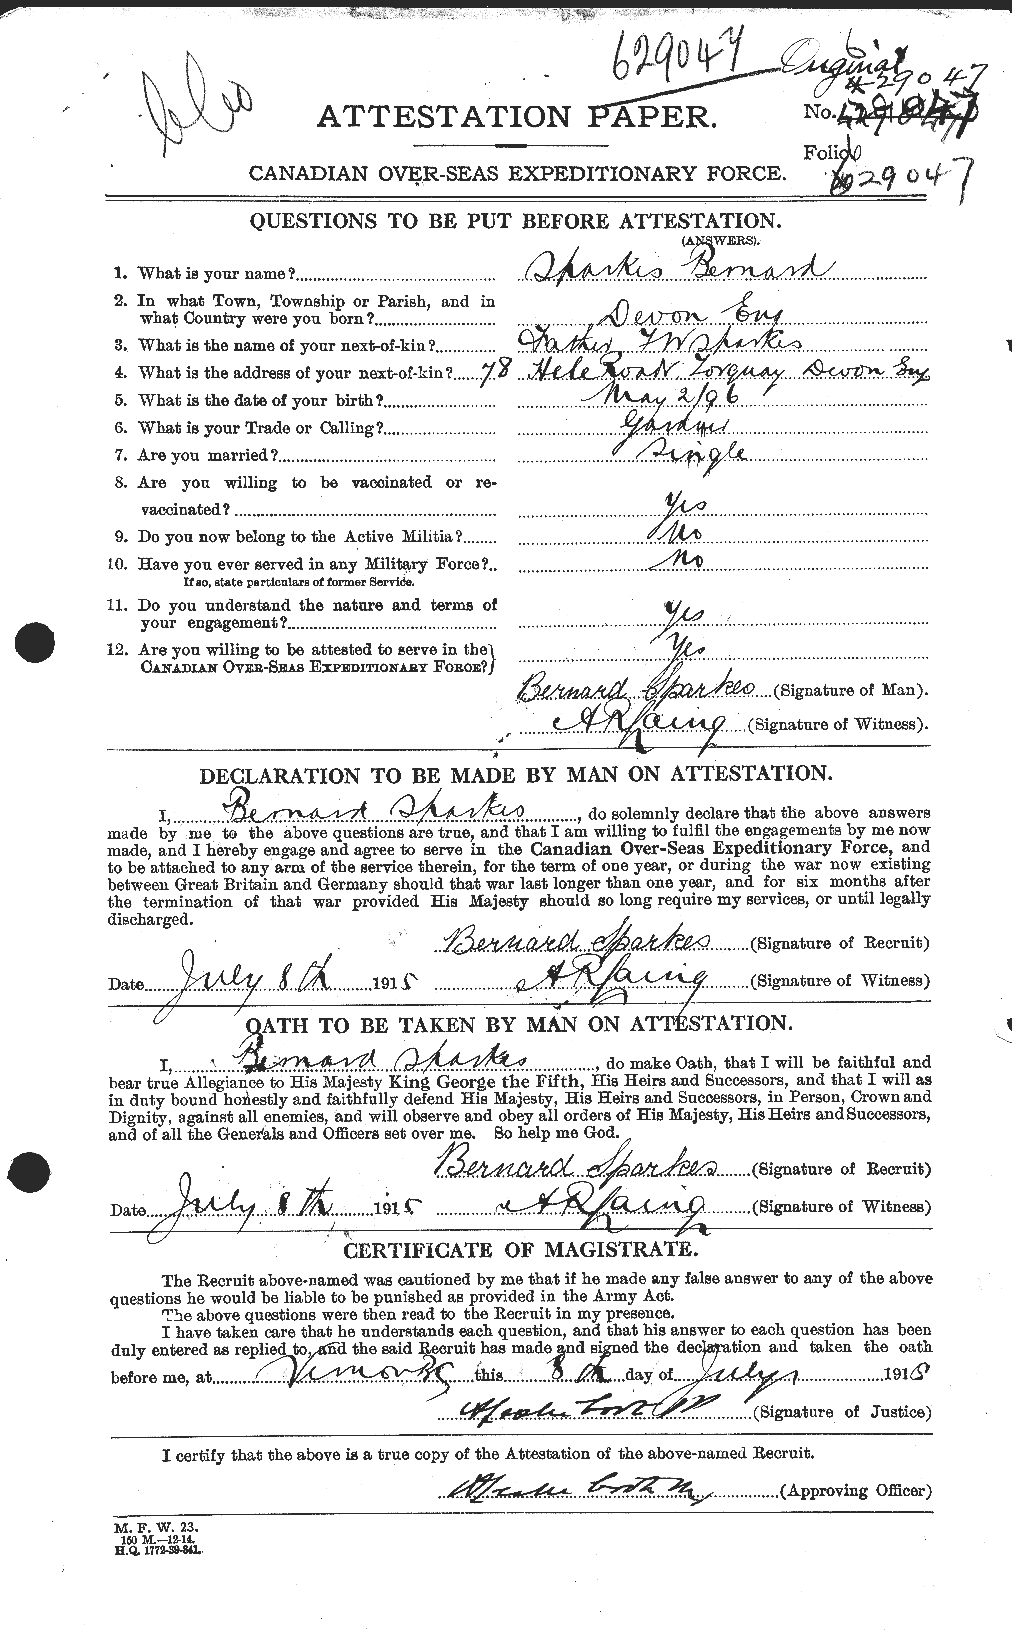 Personnel Records of the First World War - CEF 622271a